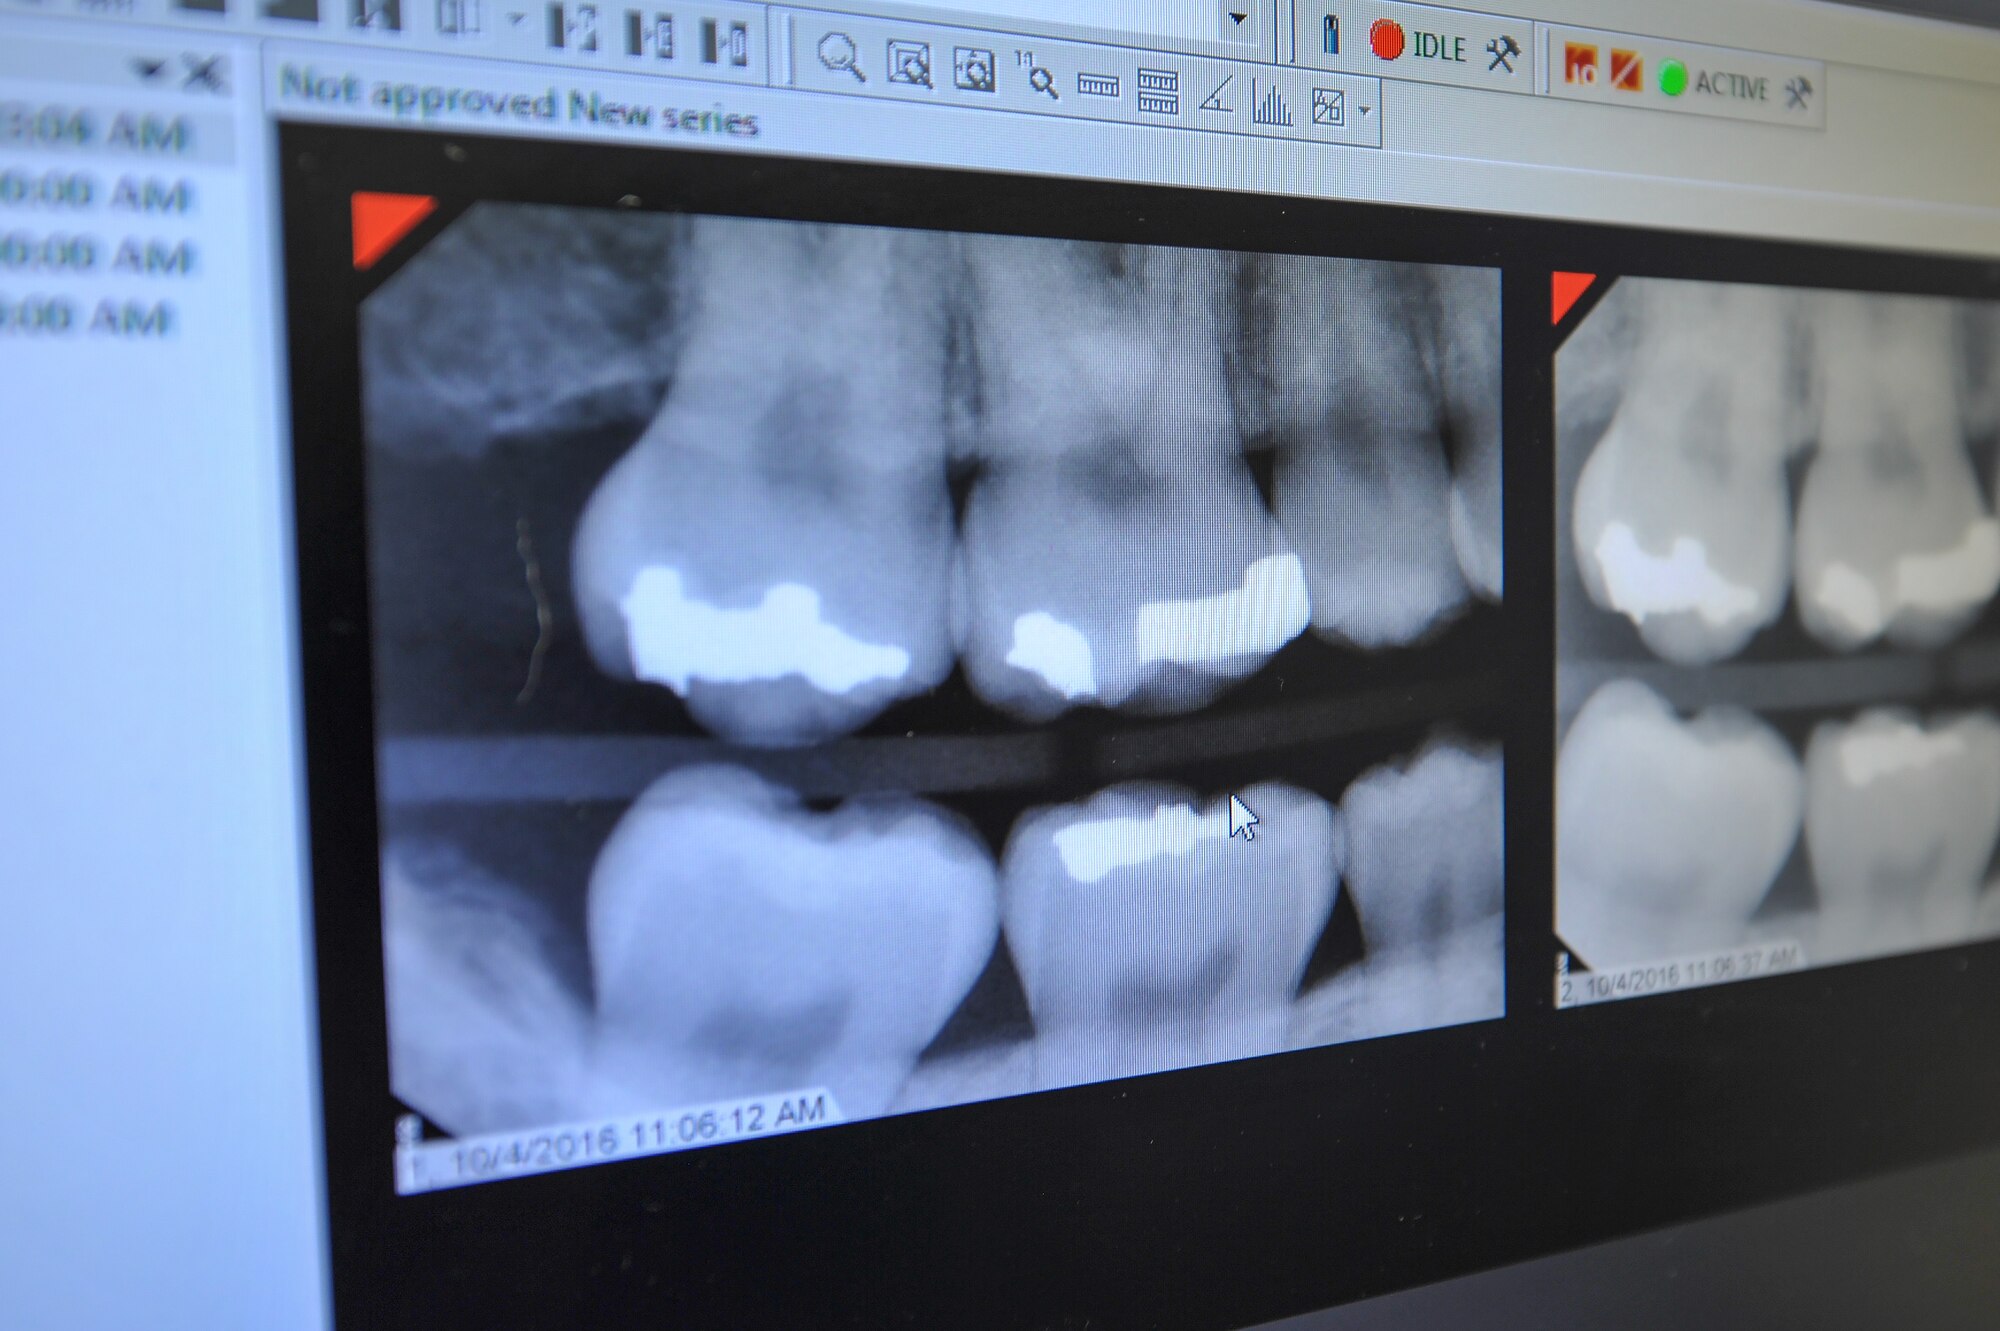 X-rays are displayed on a computer screen for a dentist to review at Hurlburt Field, Fla., Oct. 4, 2016. X-rays are used by dentists during annual exams to identify any imperfections in the patient’s teeth that may need treatment. (U.S. Air Force photo by Senior Airman Jeff Parkinson/Released)
